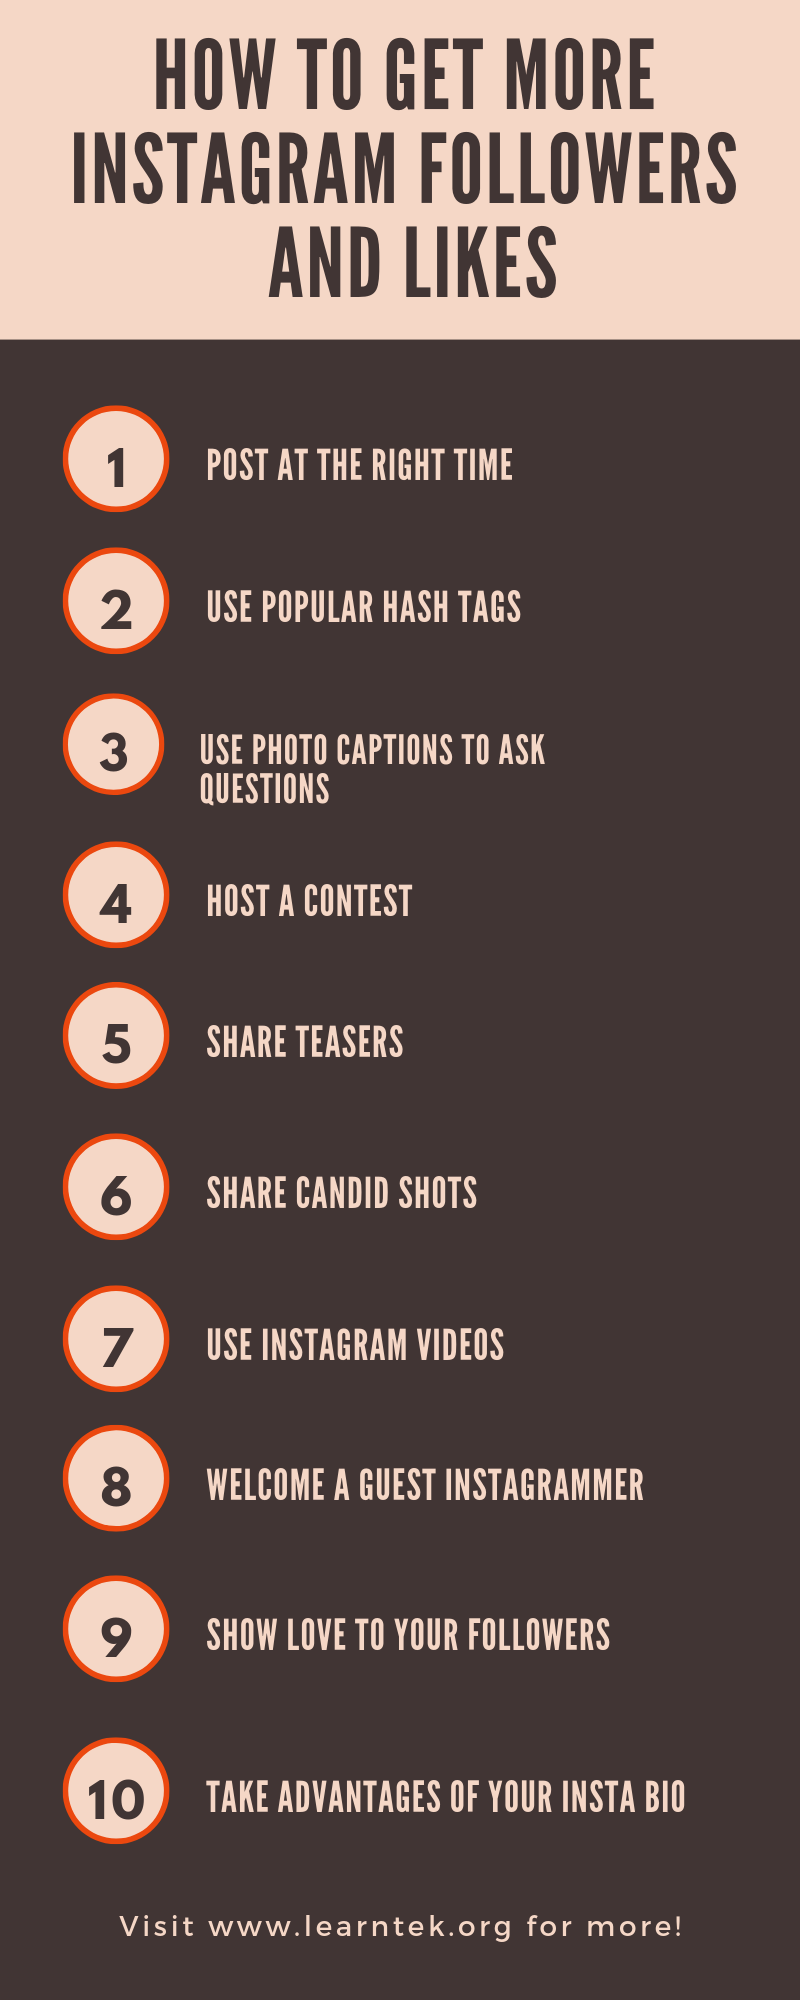 HOW TO GET MORE INSTAGRAM FOLLOWERS AND LIKES